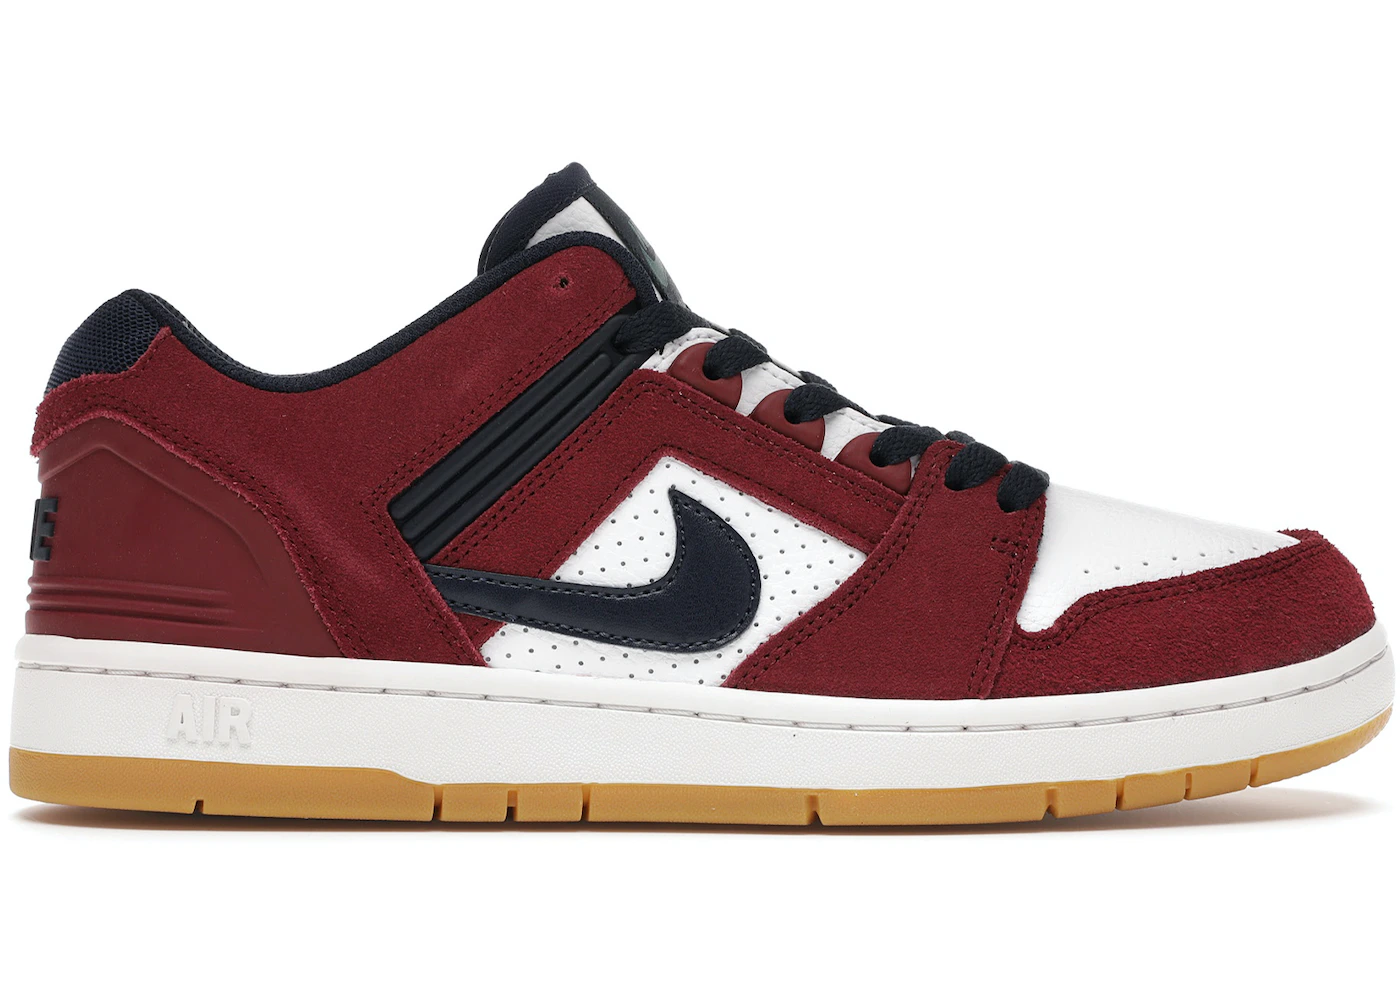 Fruity chop Spelling Nike SB Air Force 2 Low Team Red Obsidian - AO0300-600 - US